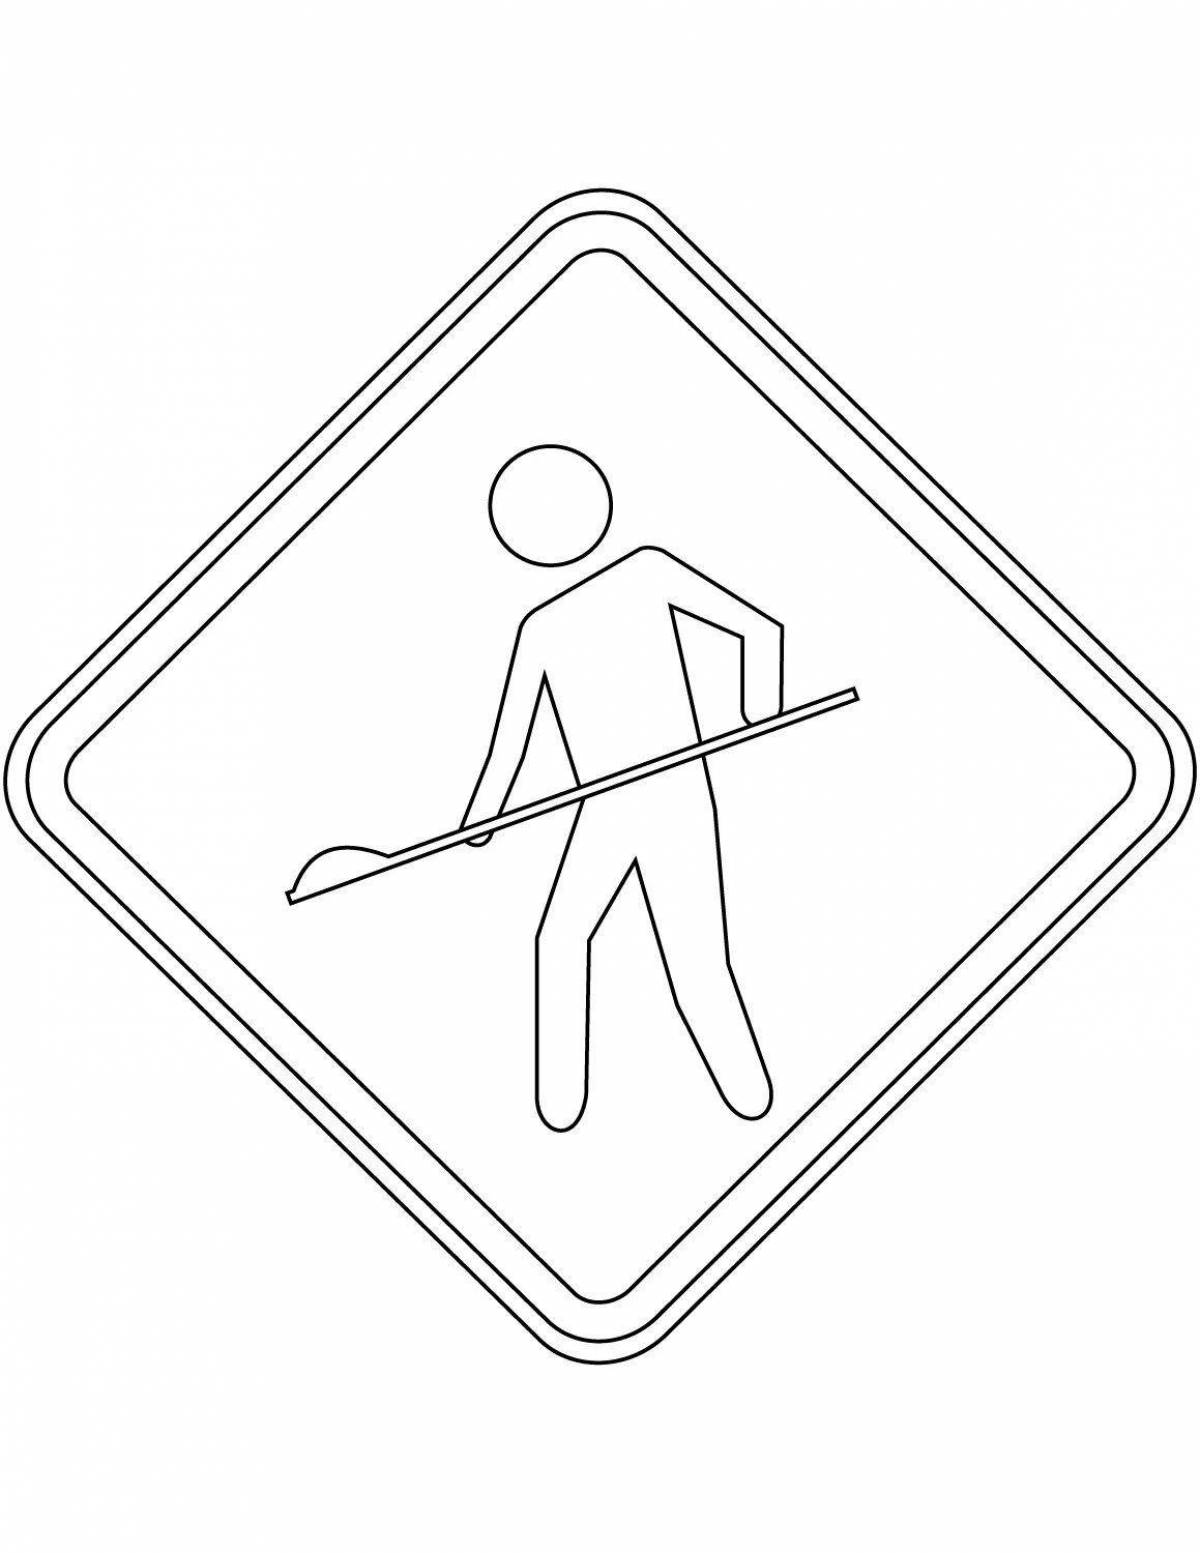 Coloring page bright underpass sign